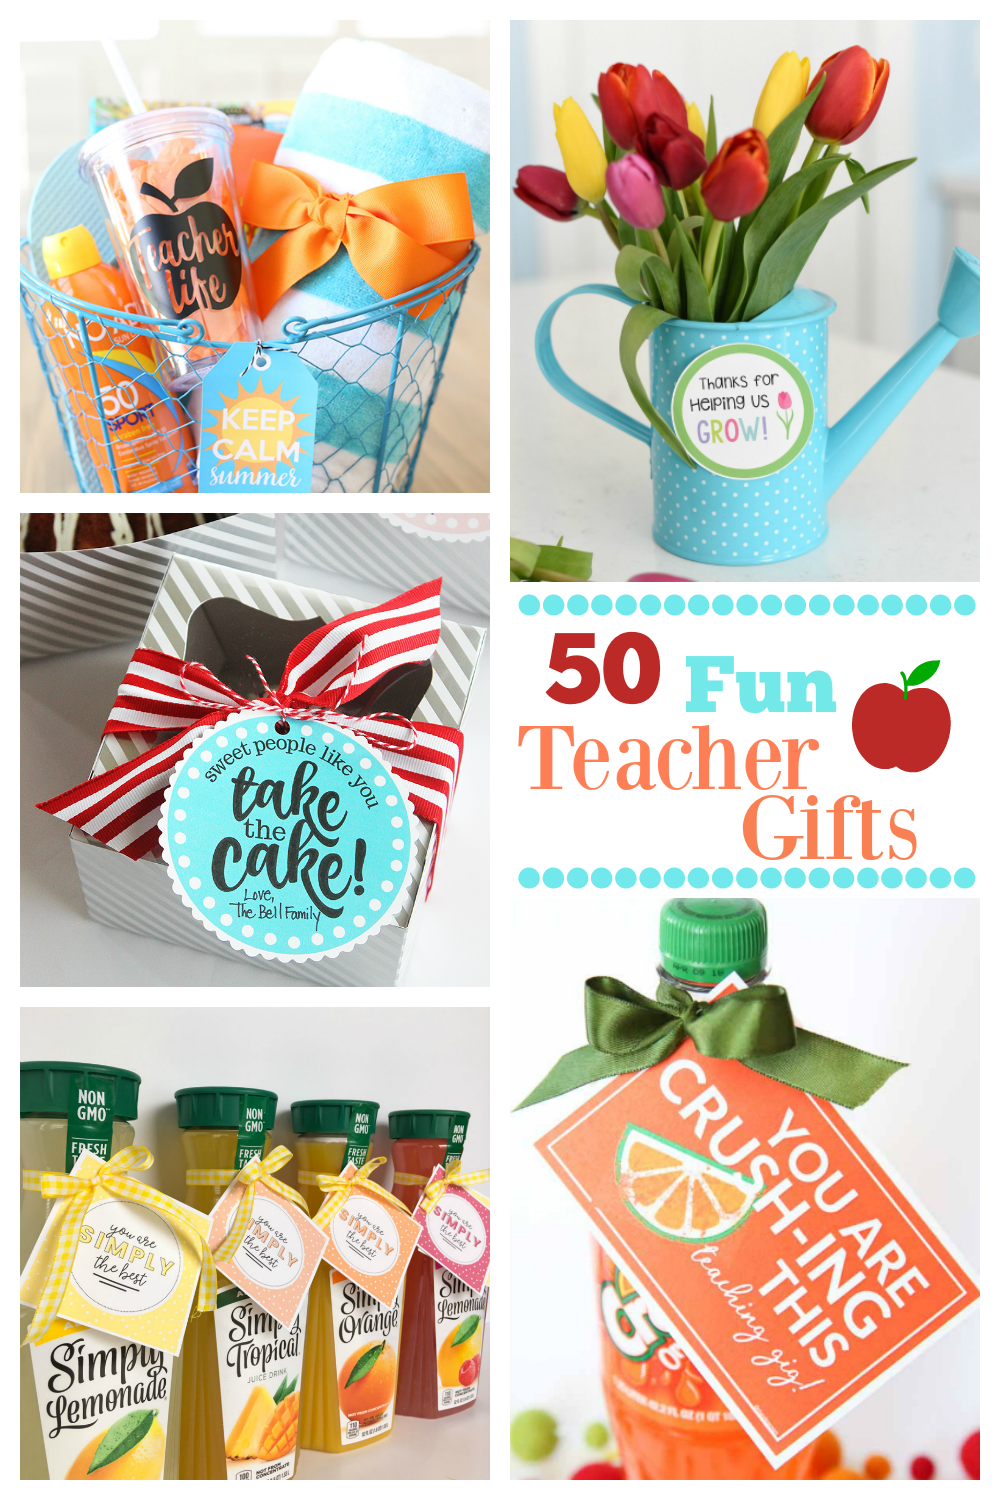 Fun teacher gifts! Lots of fun teacher gift ideas for all occasions. From teacher appreciation to end of the year teacher gifts, we have all of the ideas. #teachergifts #funteachergifts #teachergiftideas #goodteachergifts